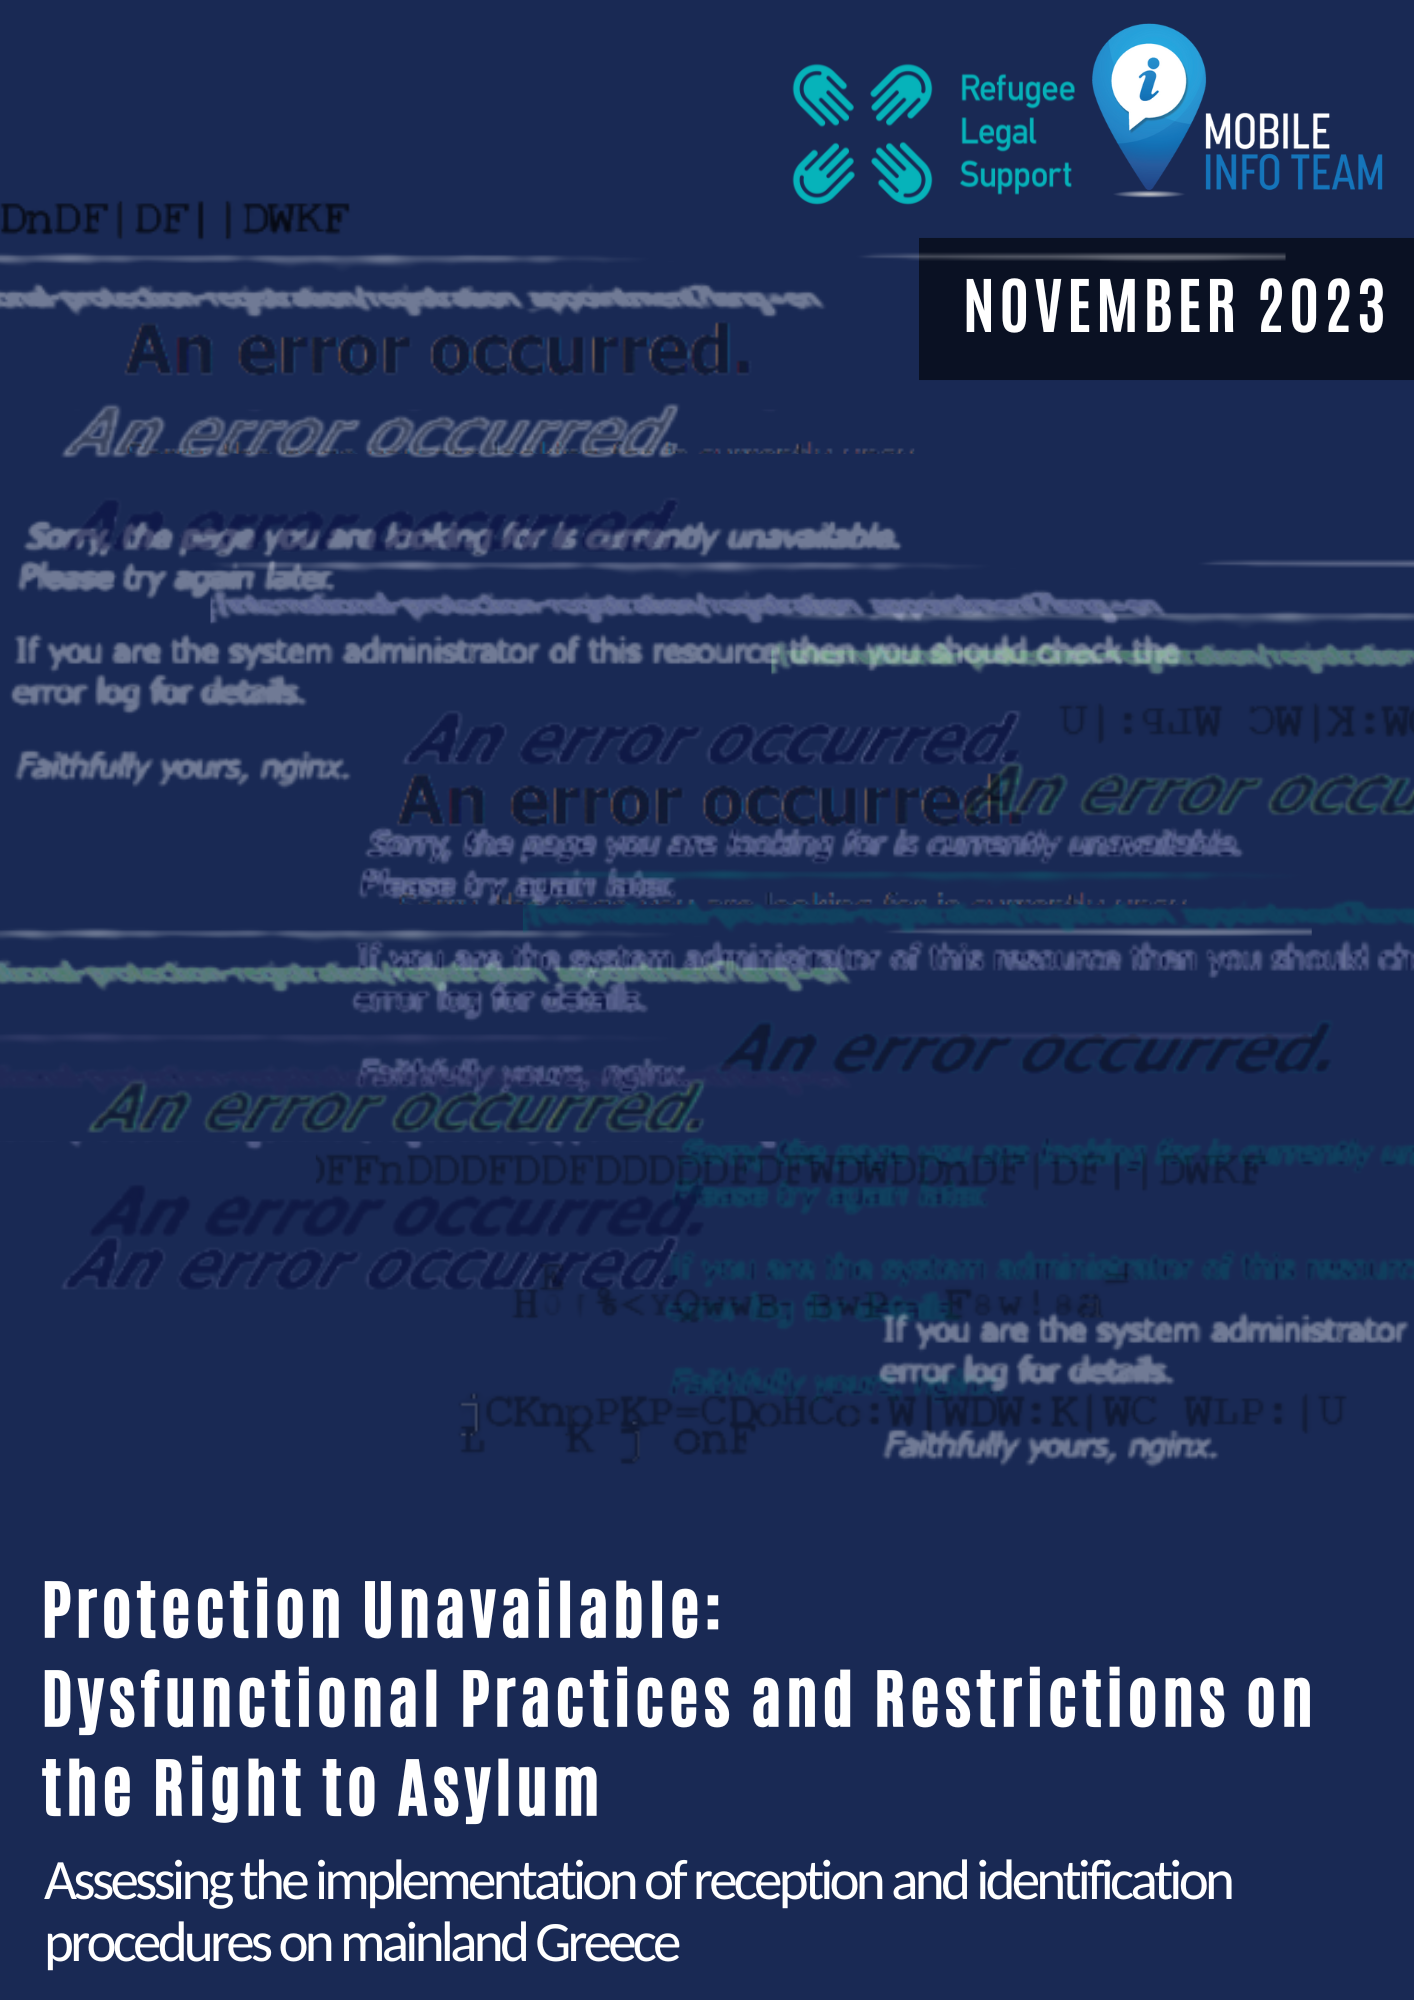 Report: Protection Unavailable 